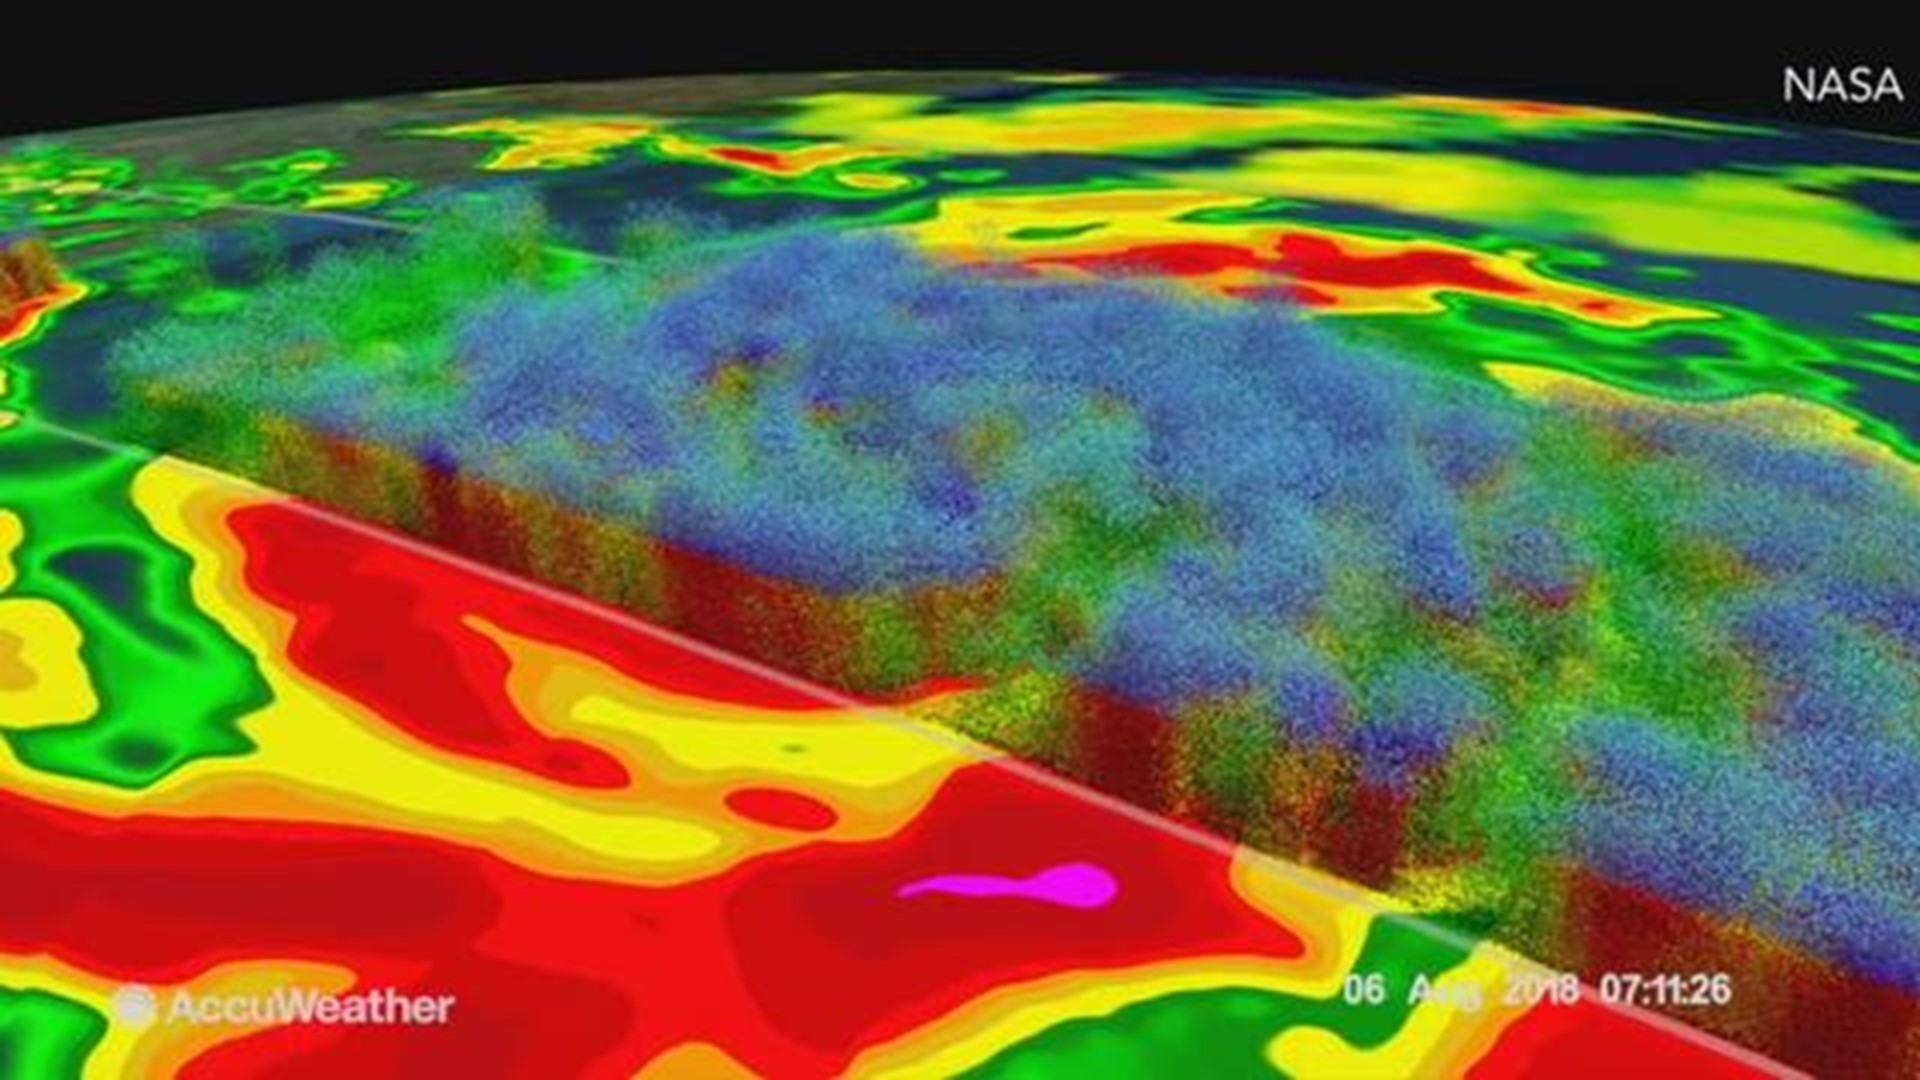 NASA's Global Precipitation Measurement mission or GPM core observatory satellite flew over Tropical Storm John on August 6. GPM showed that the large tropical cyclone was becoming well organized and had intense rainfall. 